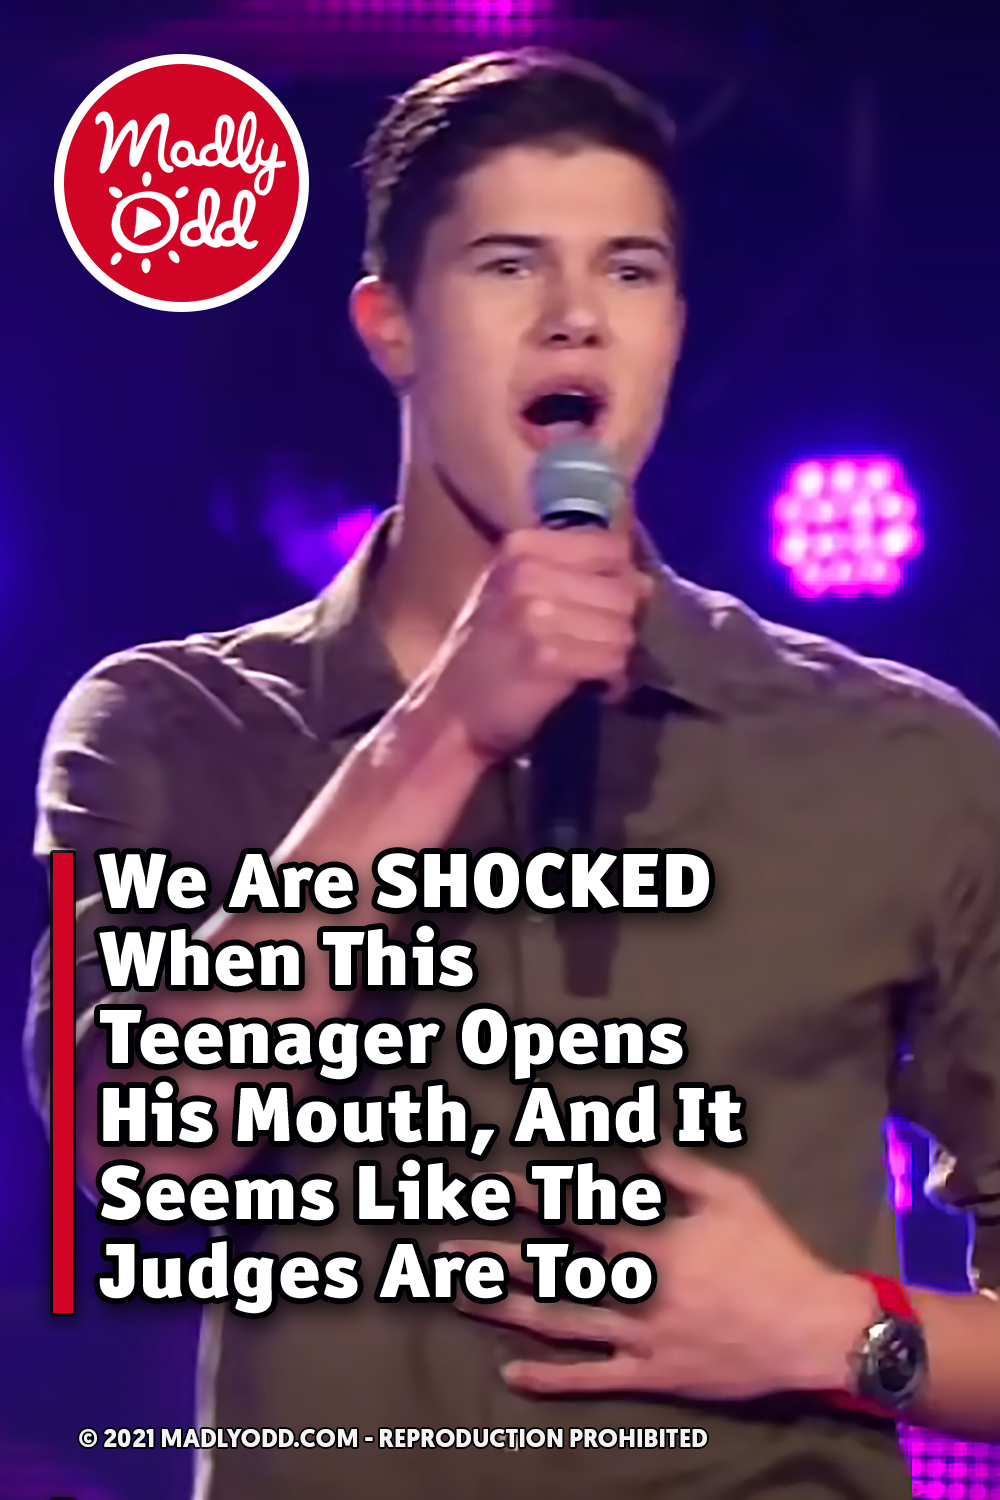 We Are SHOCKED When This Teenager Opens His Mouth, And It Seems Like The Judges Are Too